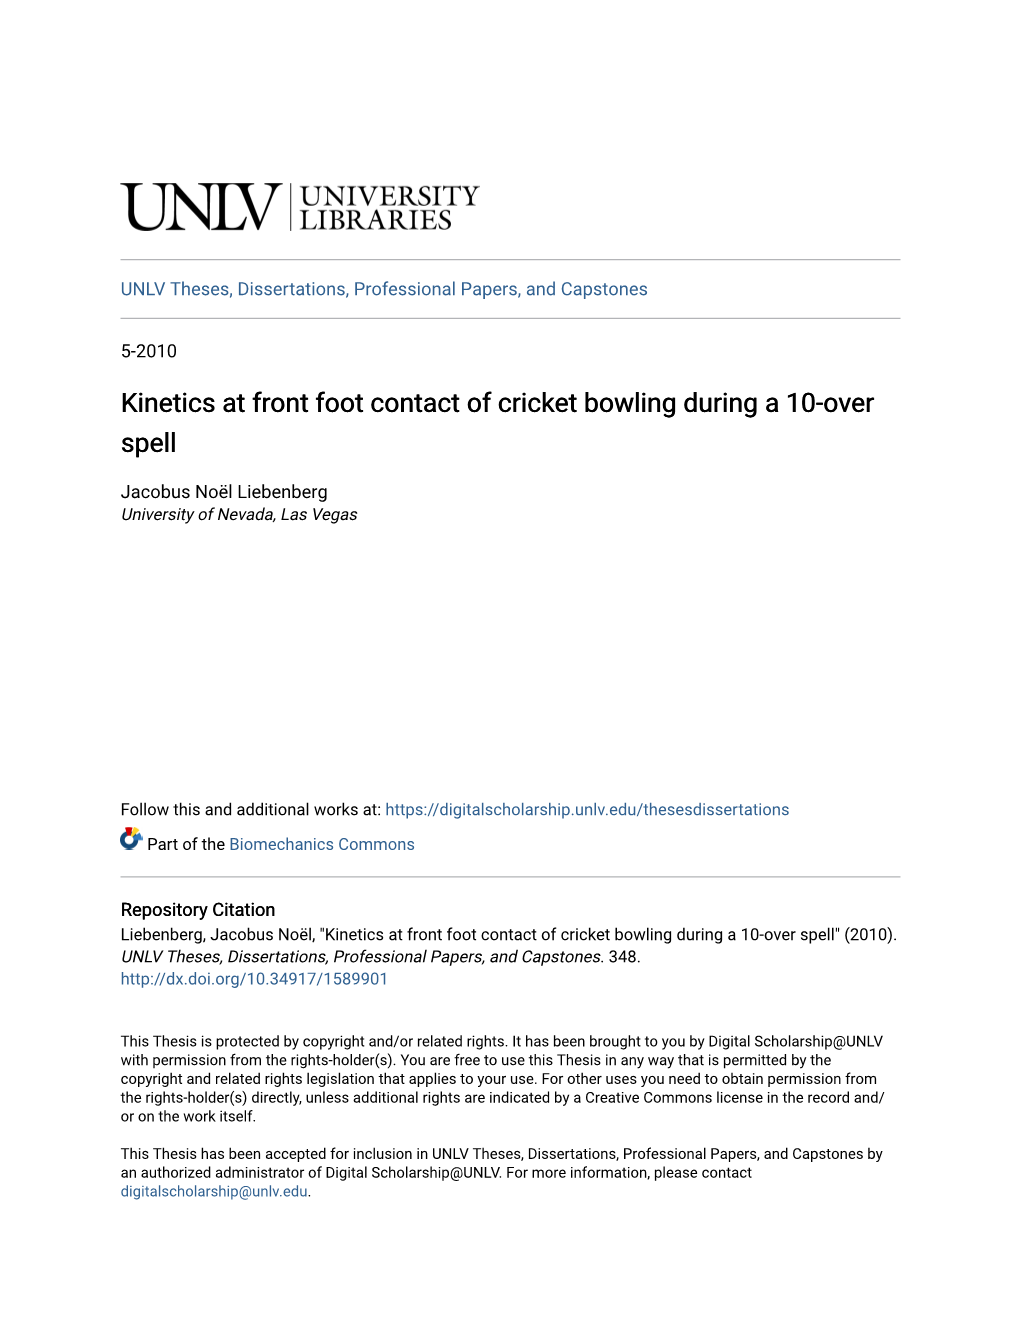 Kinetics at Front Foot Contact of Cricket Bowling During a 10-Over Spell